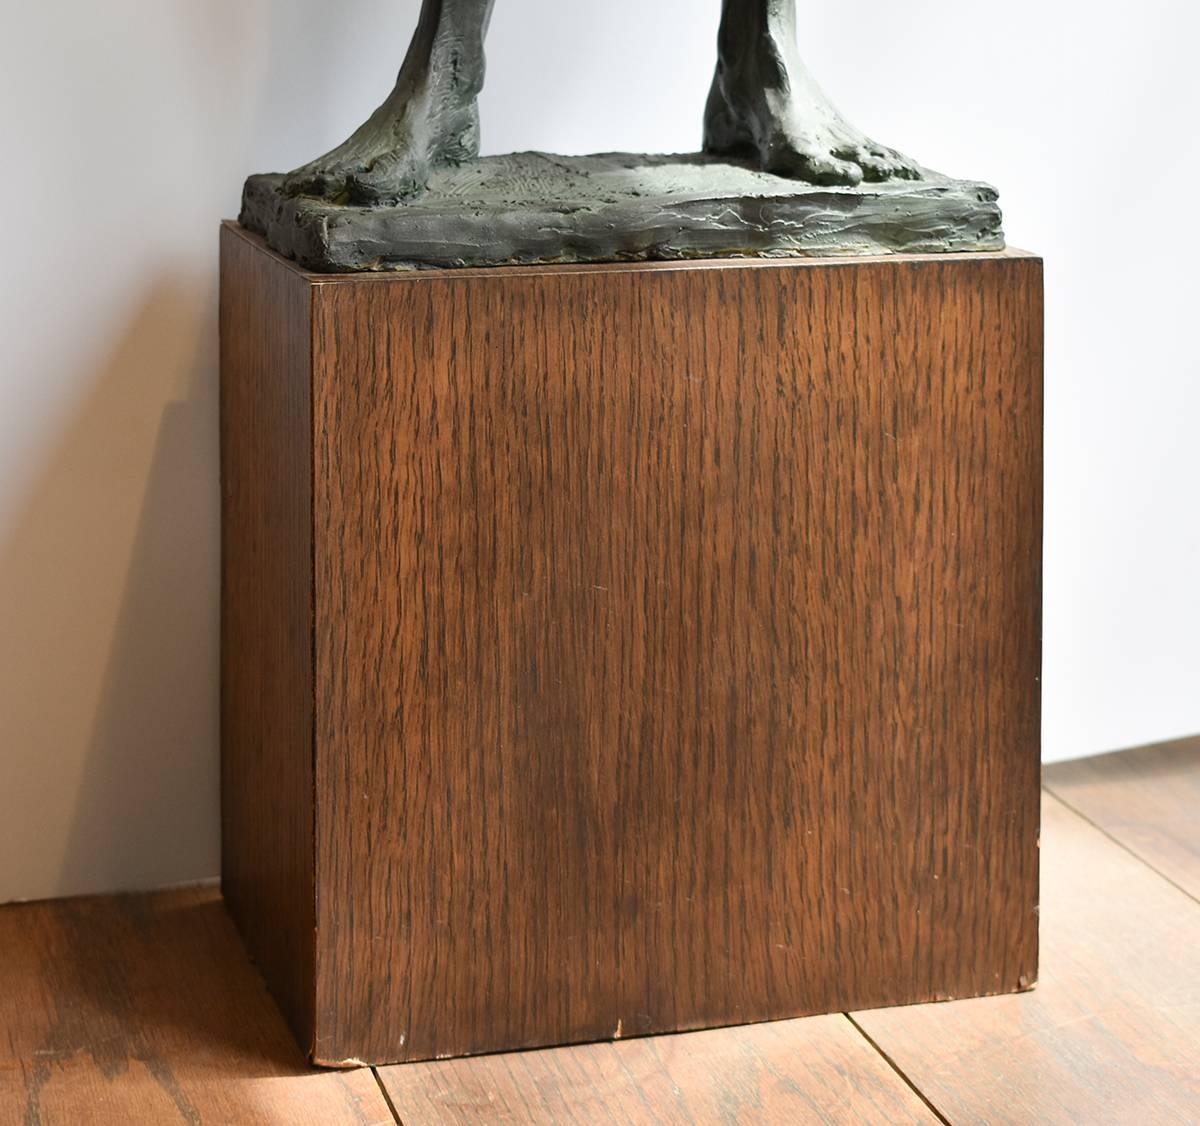 Study of Athlete (with Ball): Academic Bronze Figurative Sculpture of Nude Male by Mark Beard
modern figurative bronze sculpture of a nude athlete 
32 x 11 x 5 inches, verdegris patina
Base measures 11 x 11  7 inches

This figurative bronze